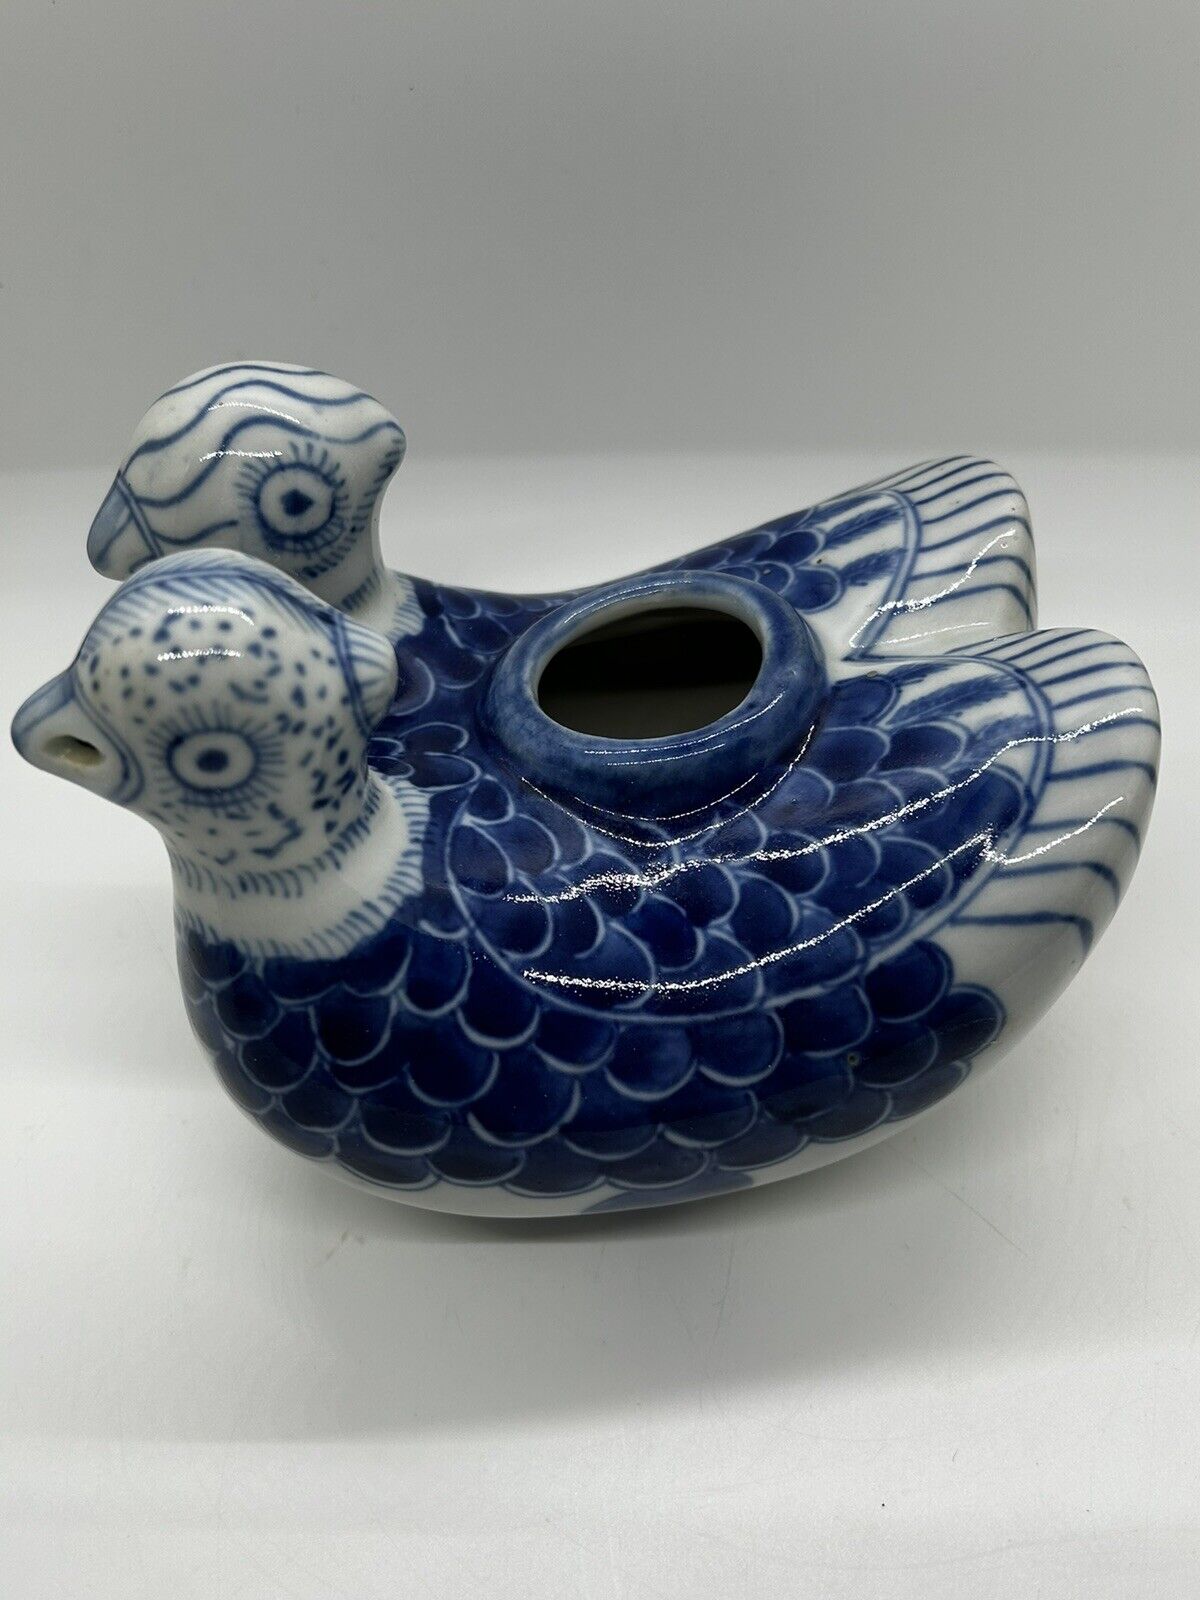 Vintage Chinese Pottery/Bisque Conjoined Ducks Water Dropper For Mixing Ink